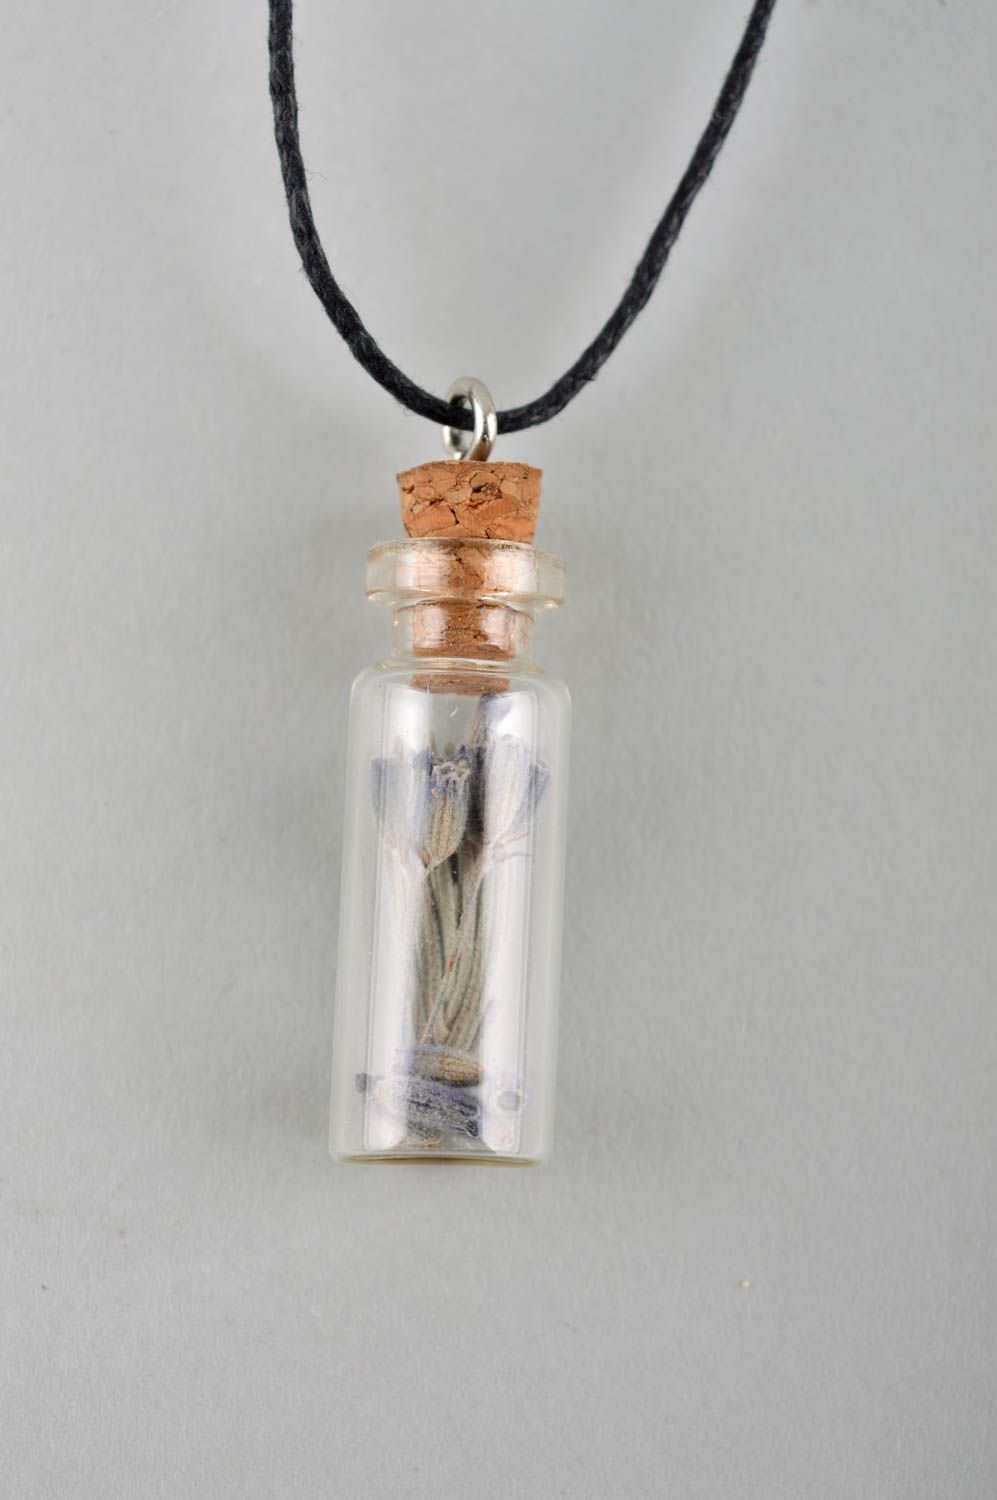 Handmade jewelry designer necklace glass vial pendant charm necklace cool gifts photo 3